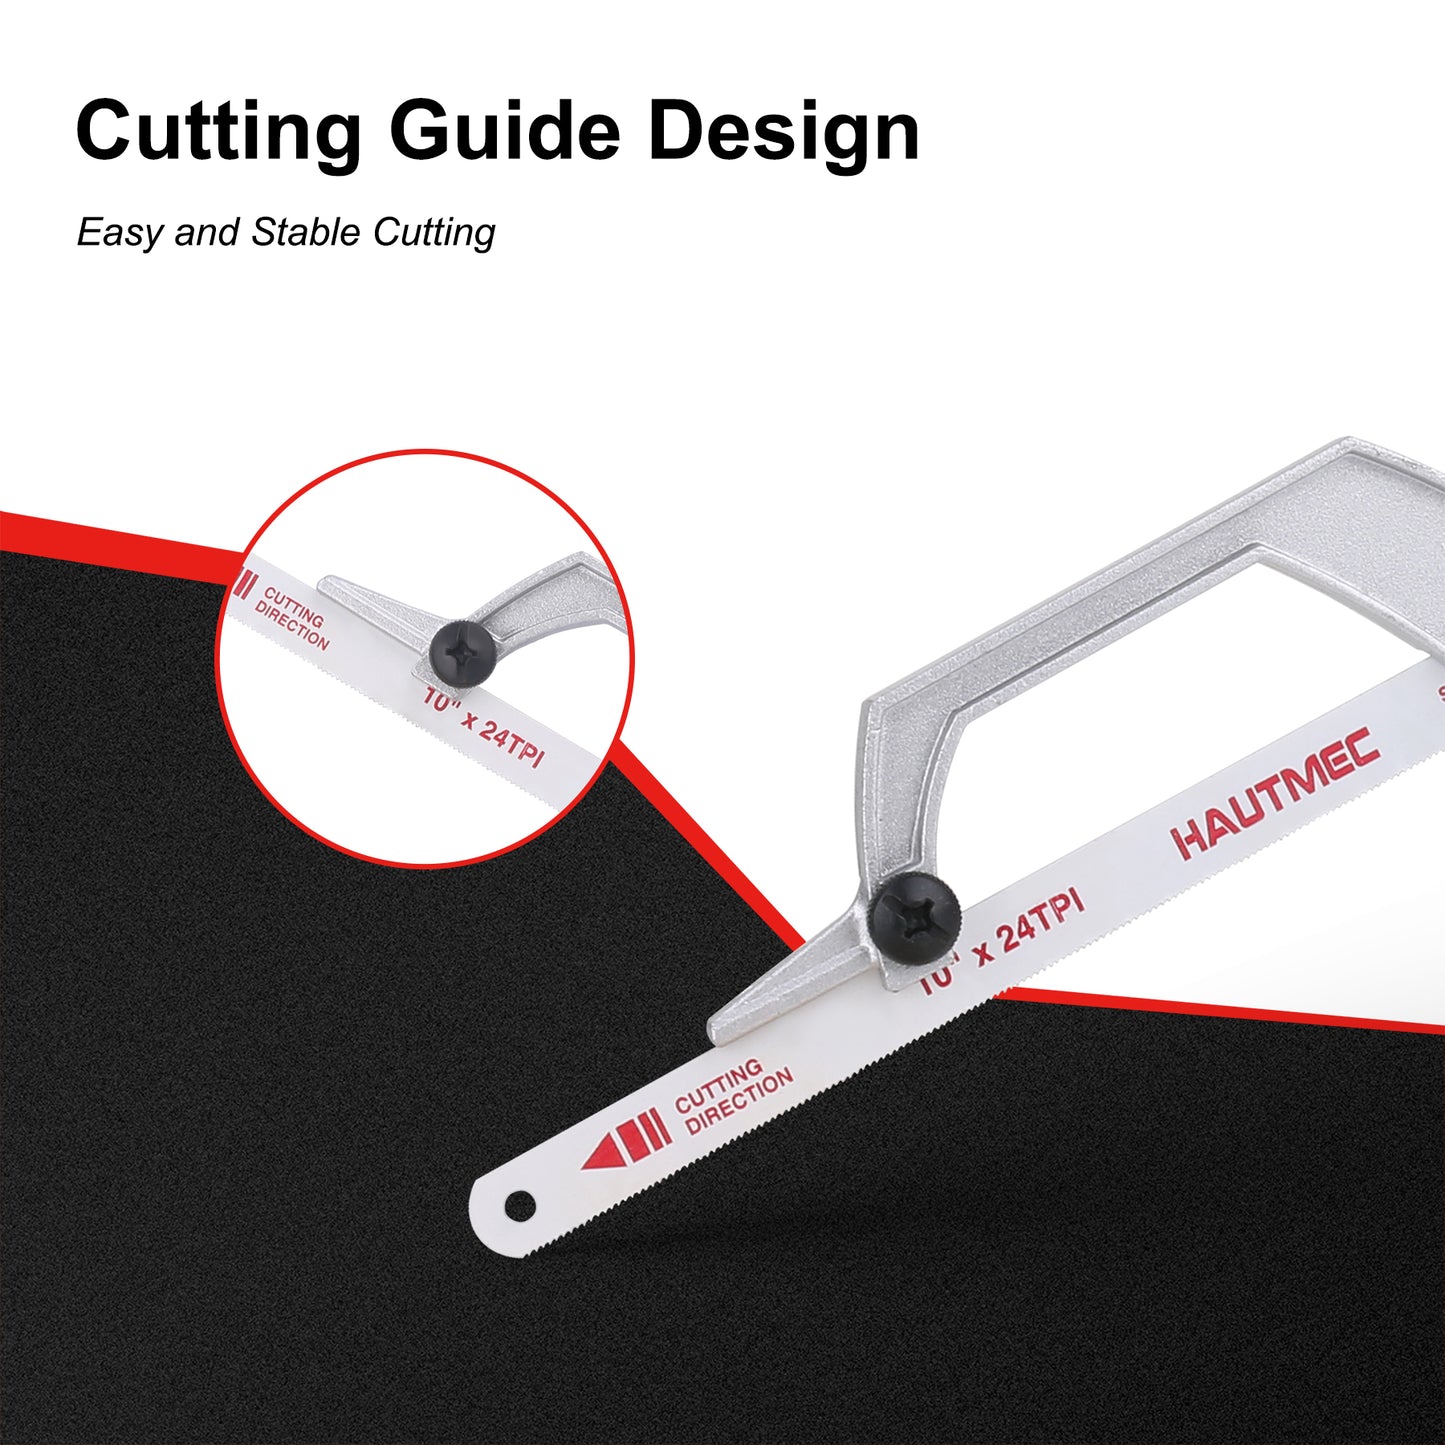 HAUTMEC Compact Mini Hacksaw With Hack Saw Bi-Metal Blade and Cutting Guide, Alluminium Alloy Solid Frame, For Easy Cutting, Especially Cuts in Tight Hard-Reach Spaces HT0309-MS